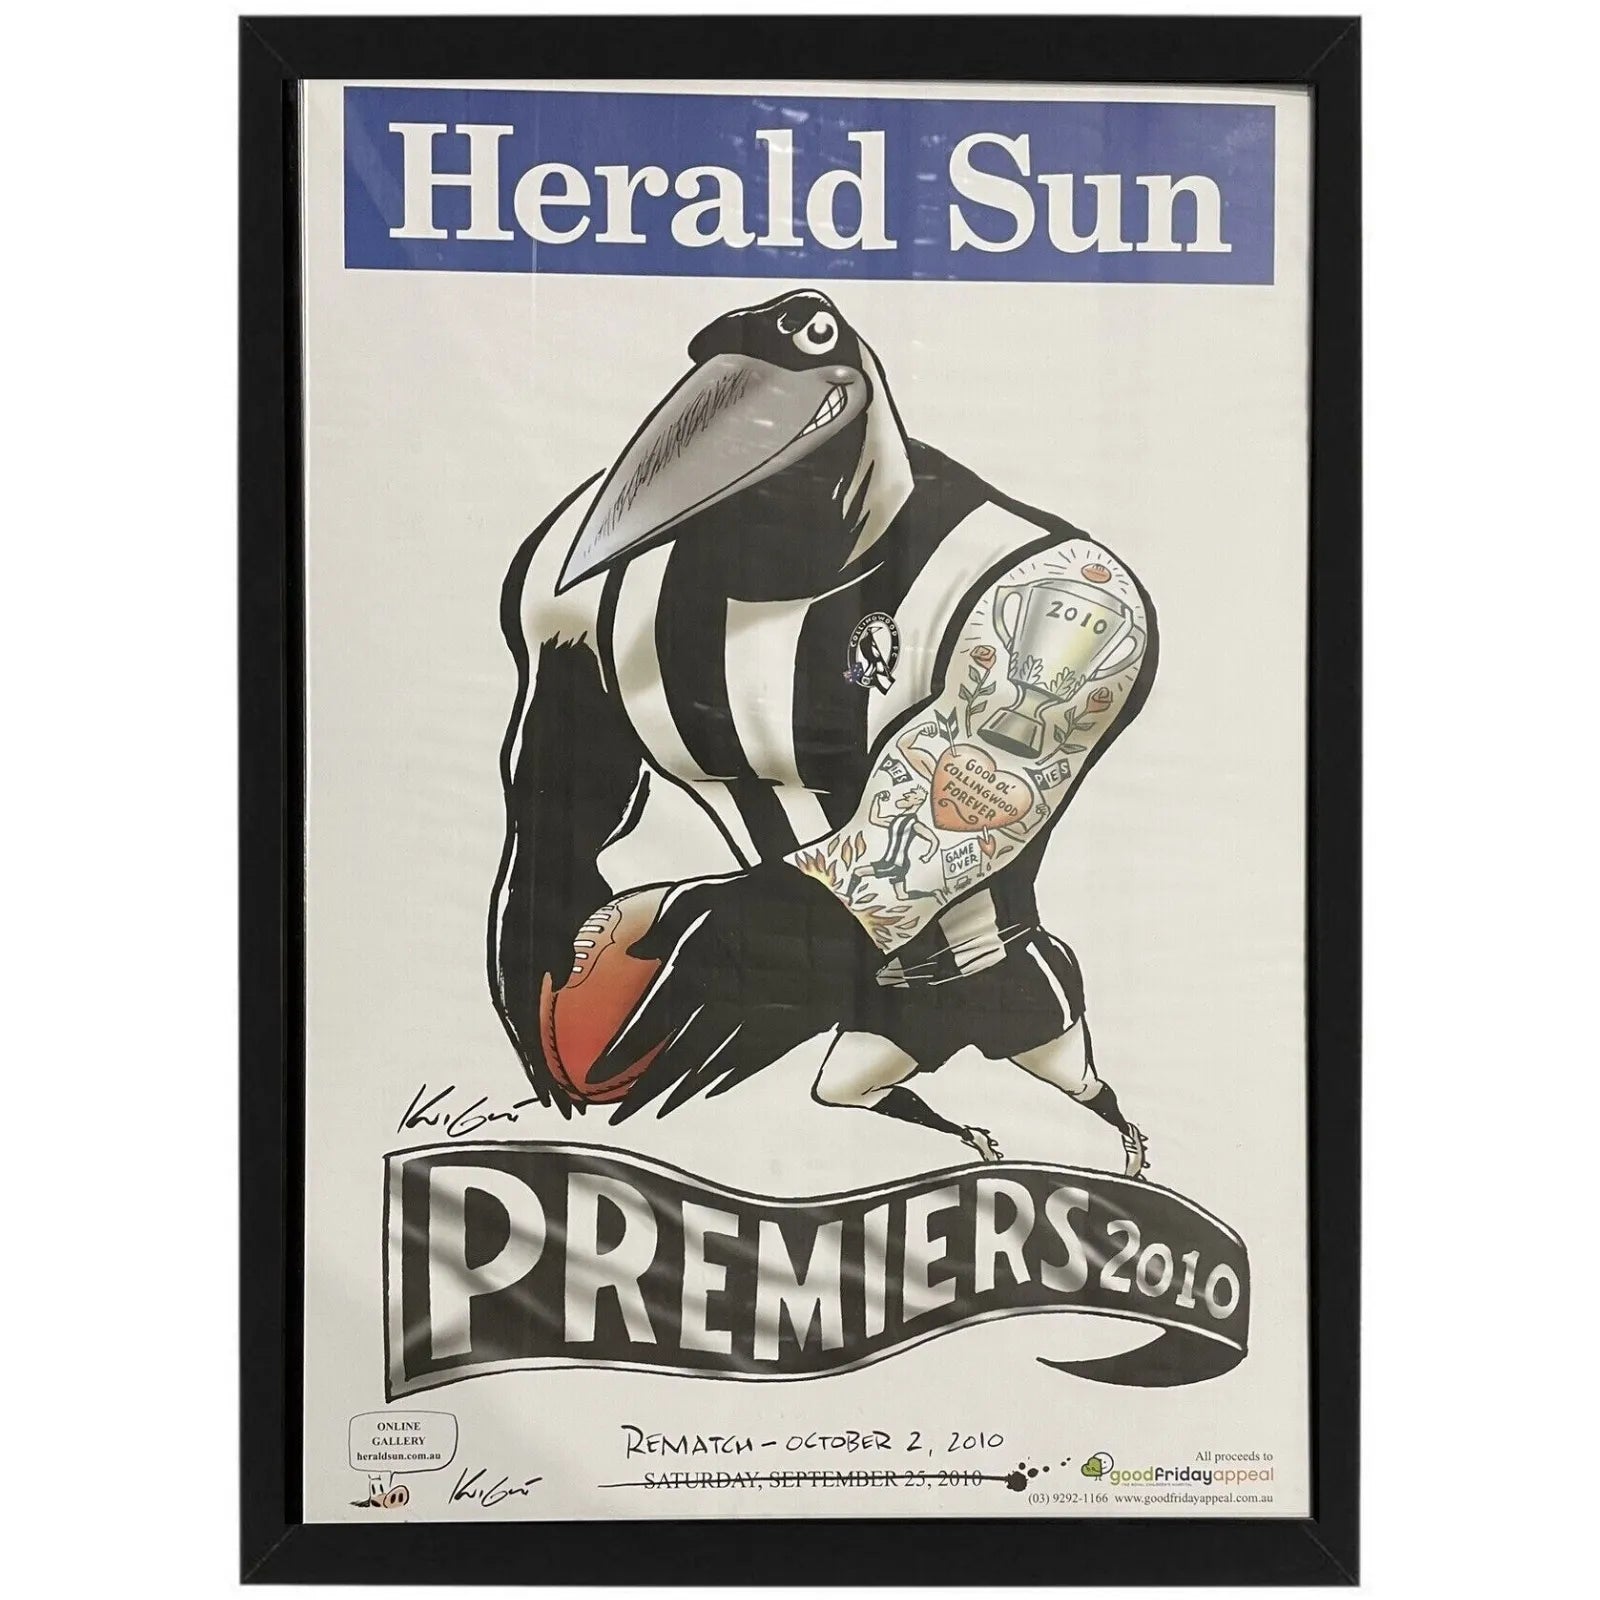 Collingwood 2010 Mark Knight Premiers Poster Framed - KING CAVE